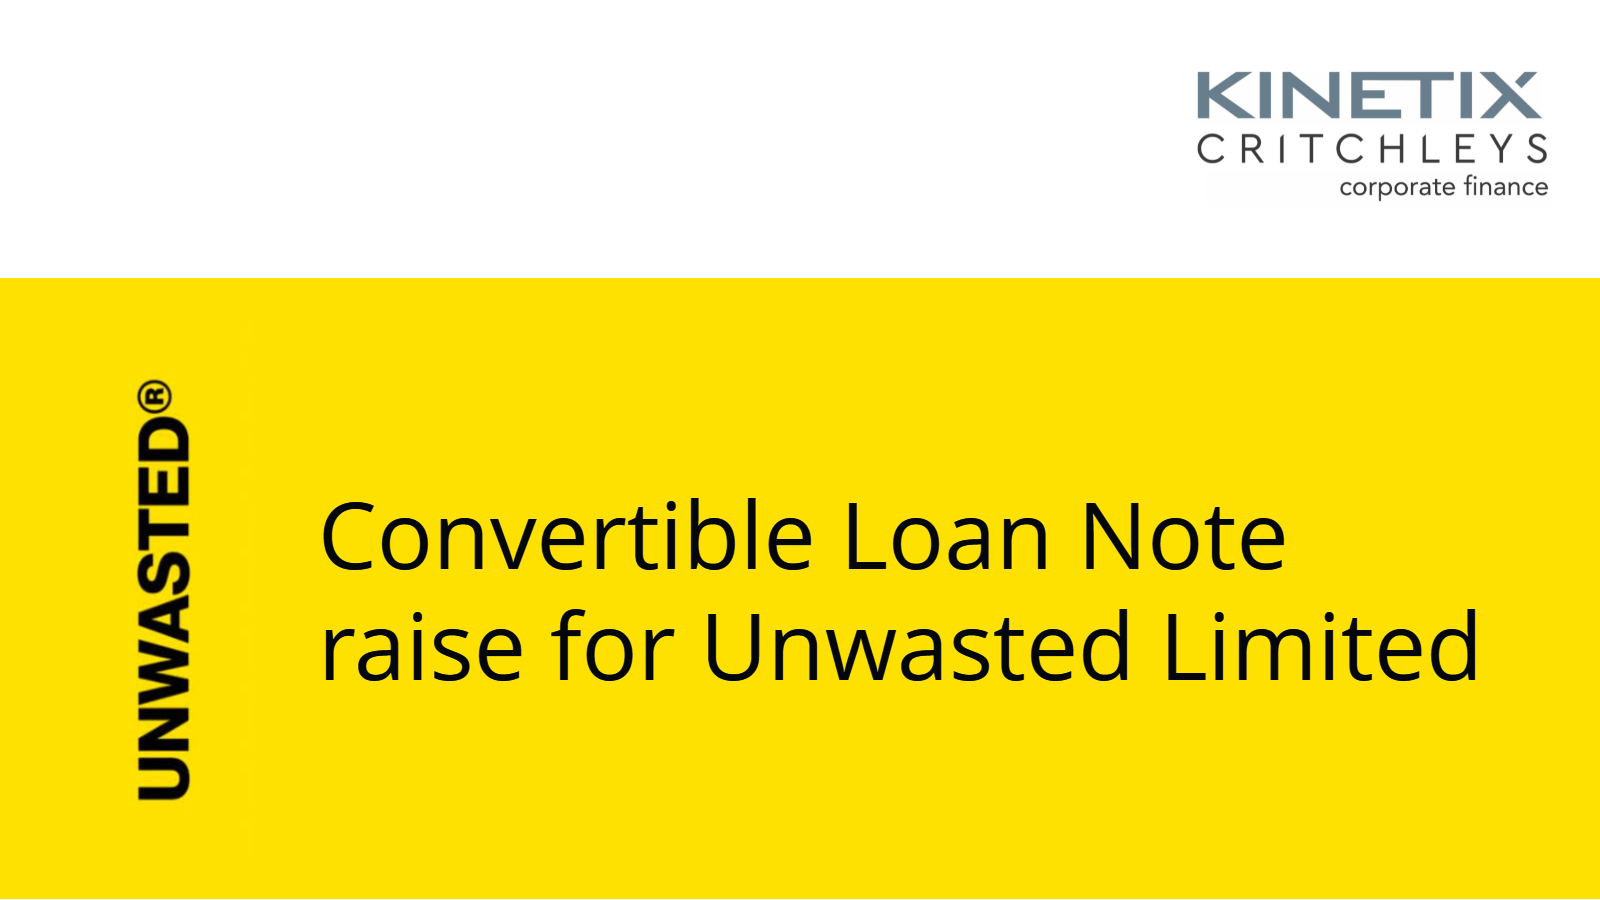 Convertible Loan Note raise for Unwasted Limited